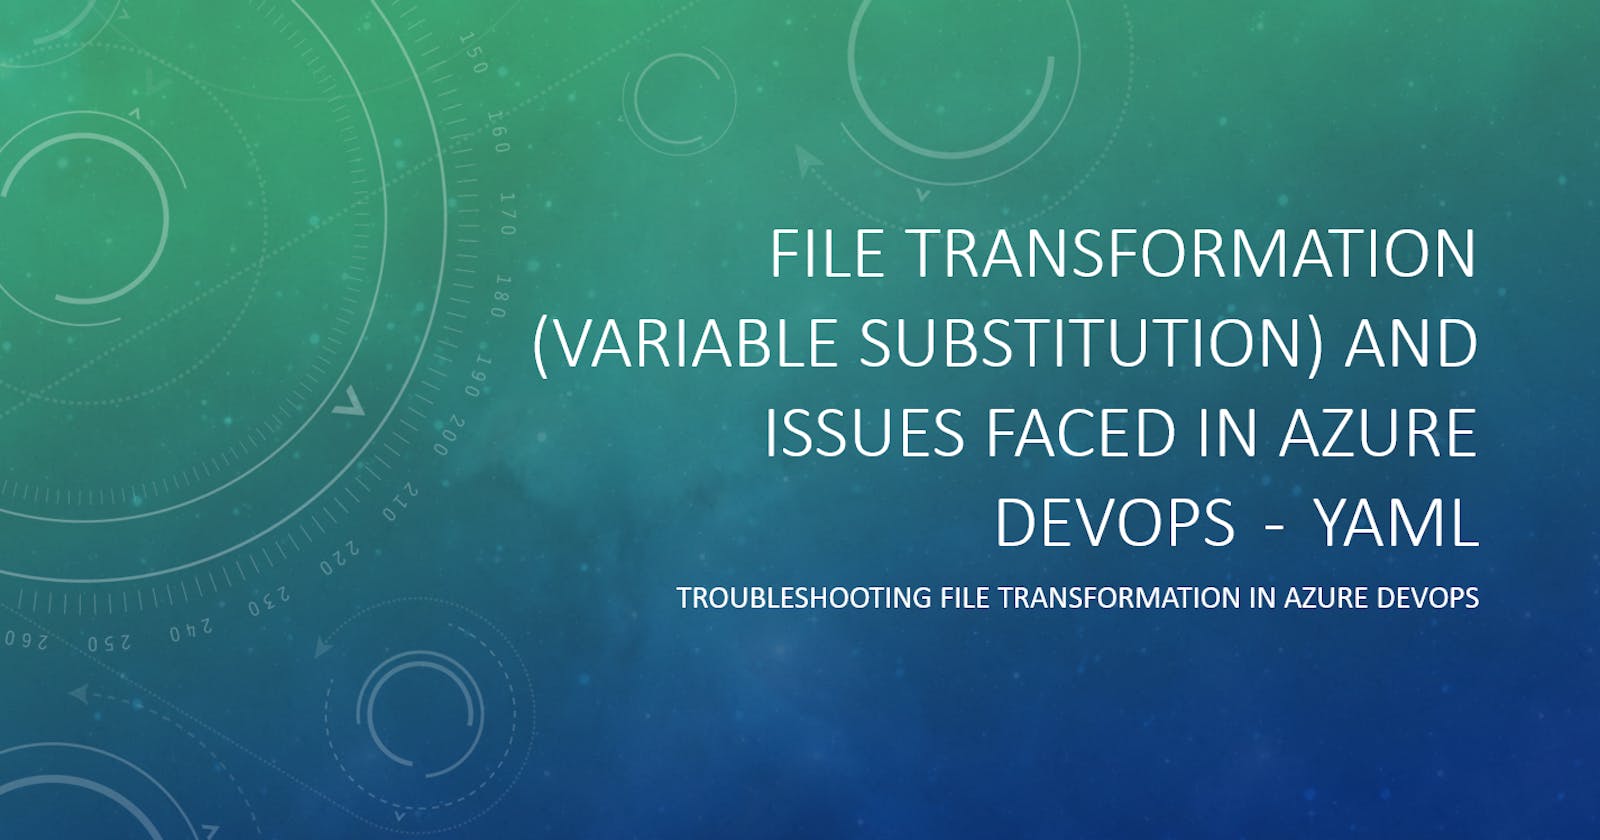 File Transformation (variable substitution) and issues faced in Azure Devops  -  YAML